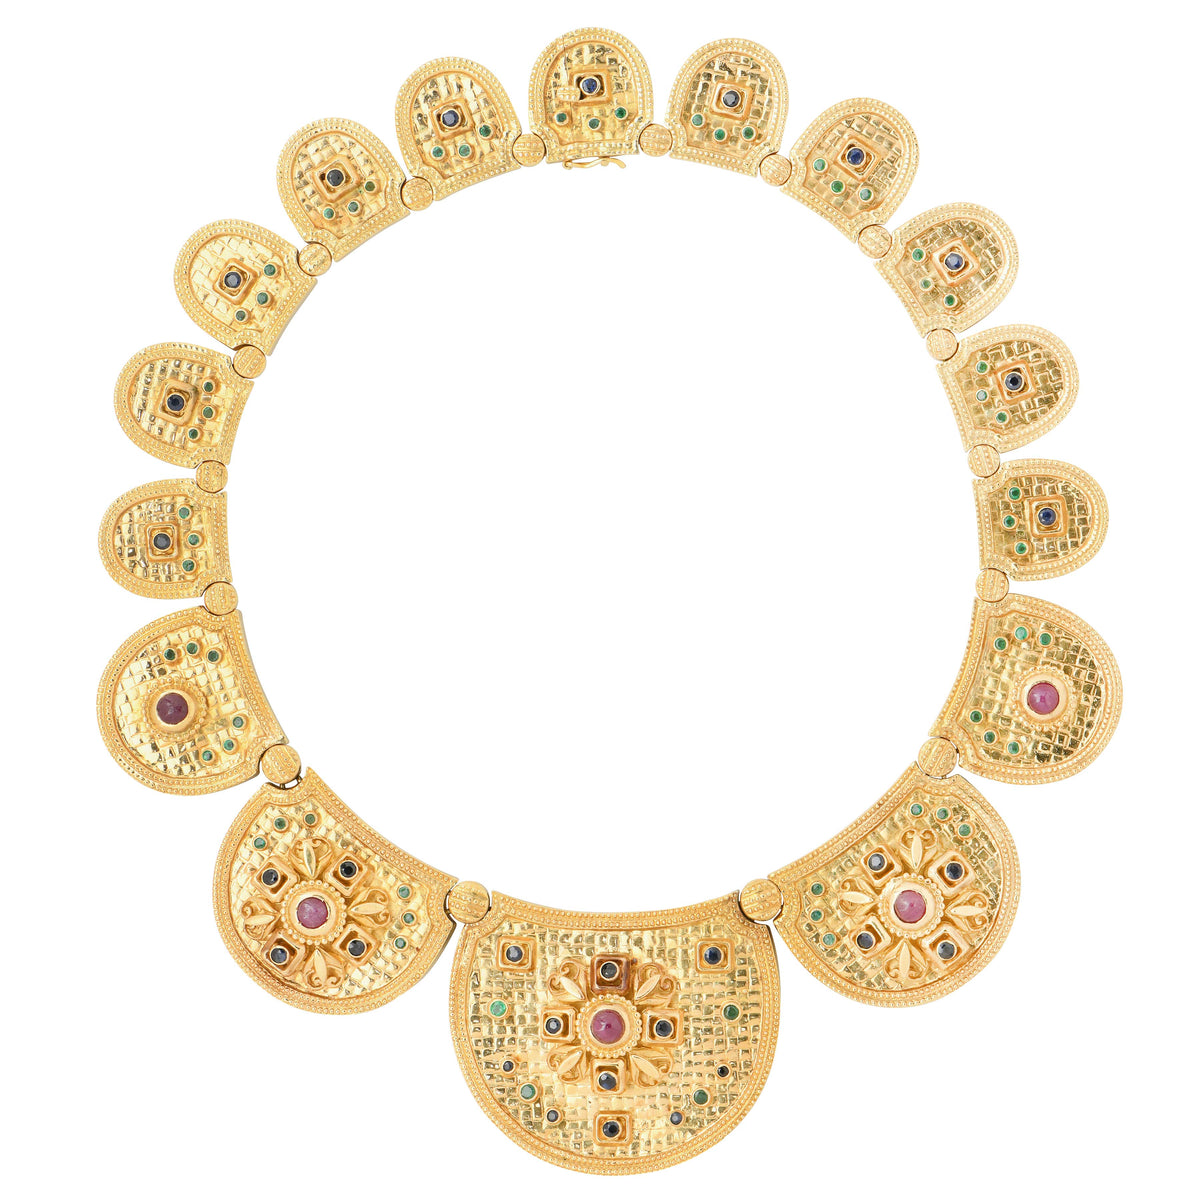 Ilias Lalaounis Etruscan Necklace with Rubies, Sapphires and Emeralds 18 Karat